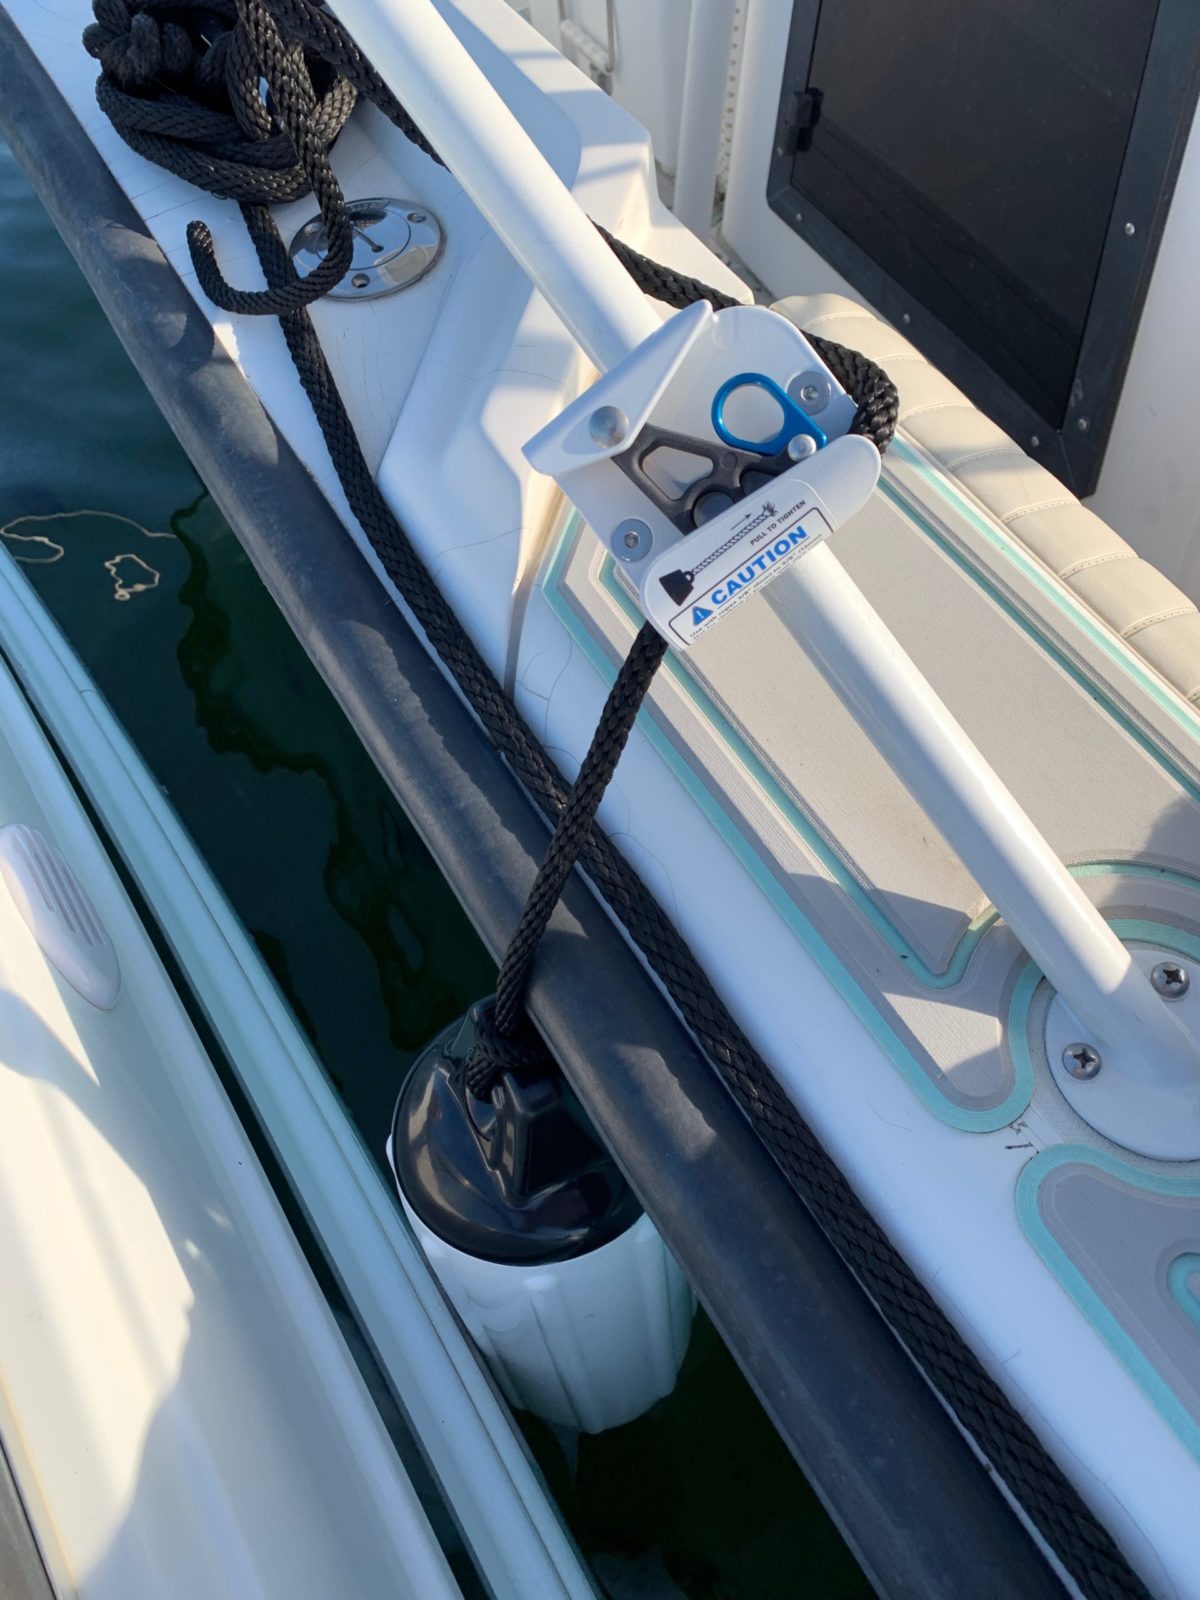 Must-Have Boating Accessories: 10 Things You Need on a Boat